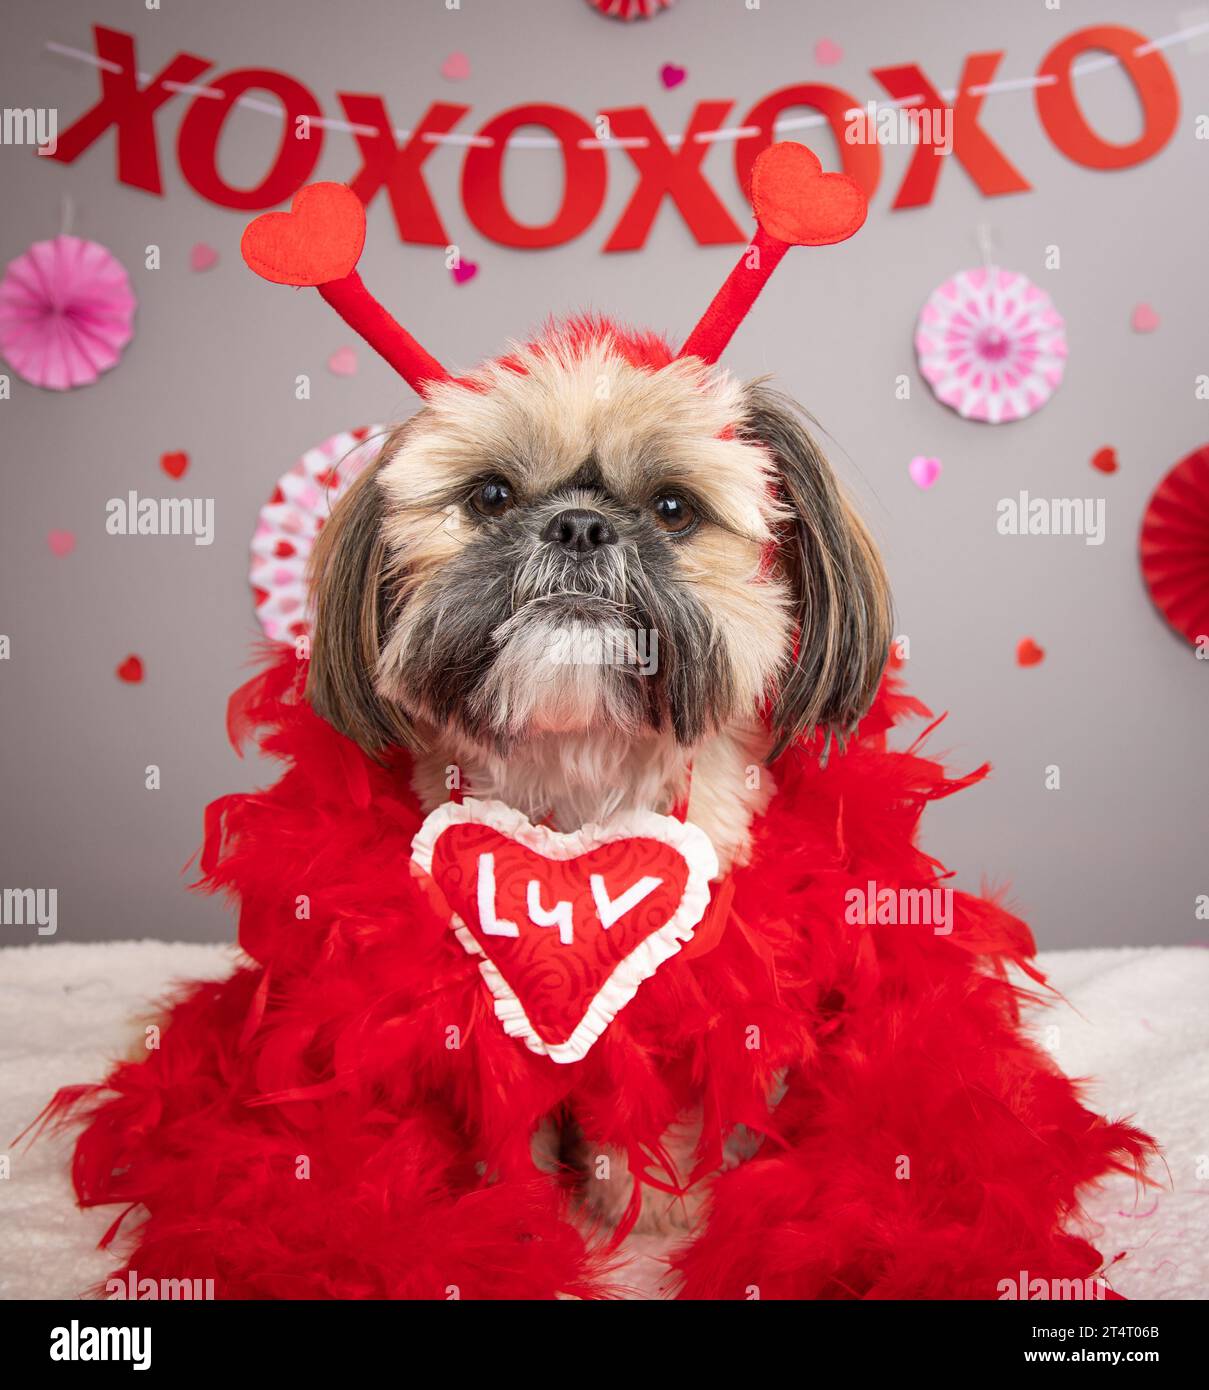 Portrait of a Shih Tzu wearing a luv heart, feather boa and headband sitting in front of festive decorations Stock Photo